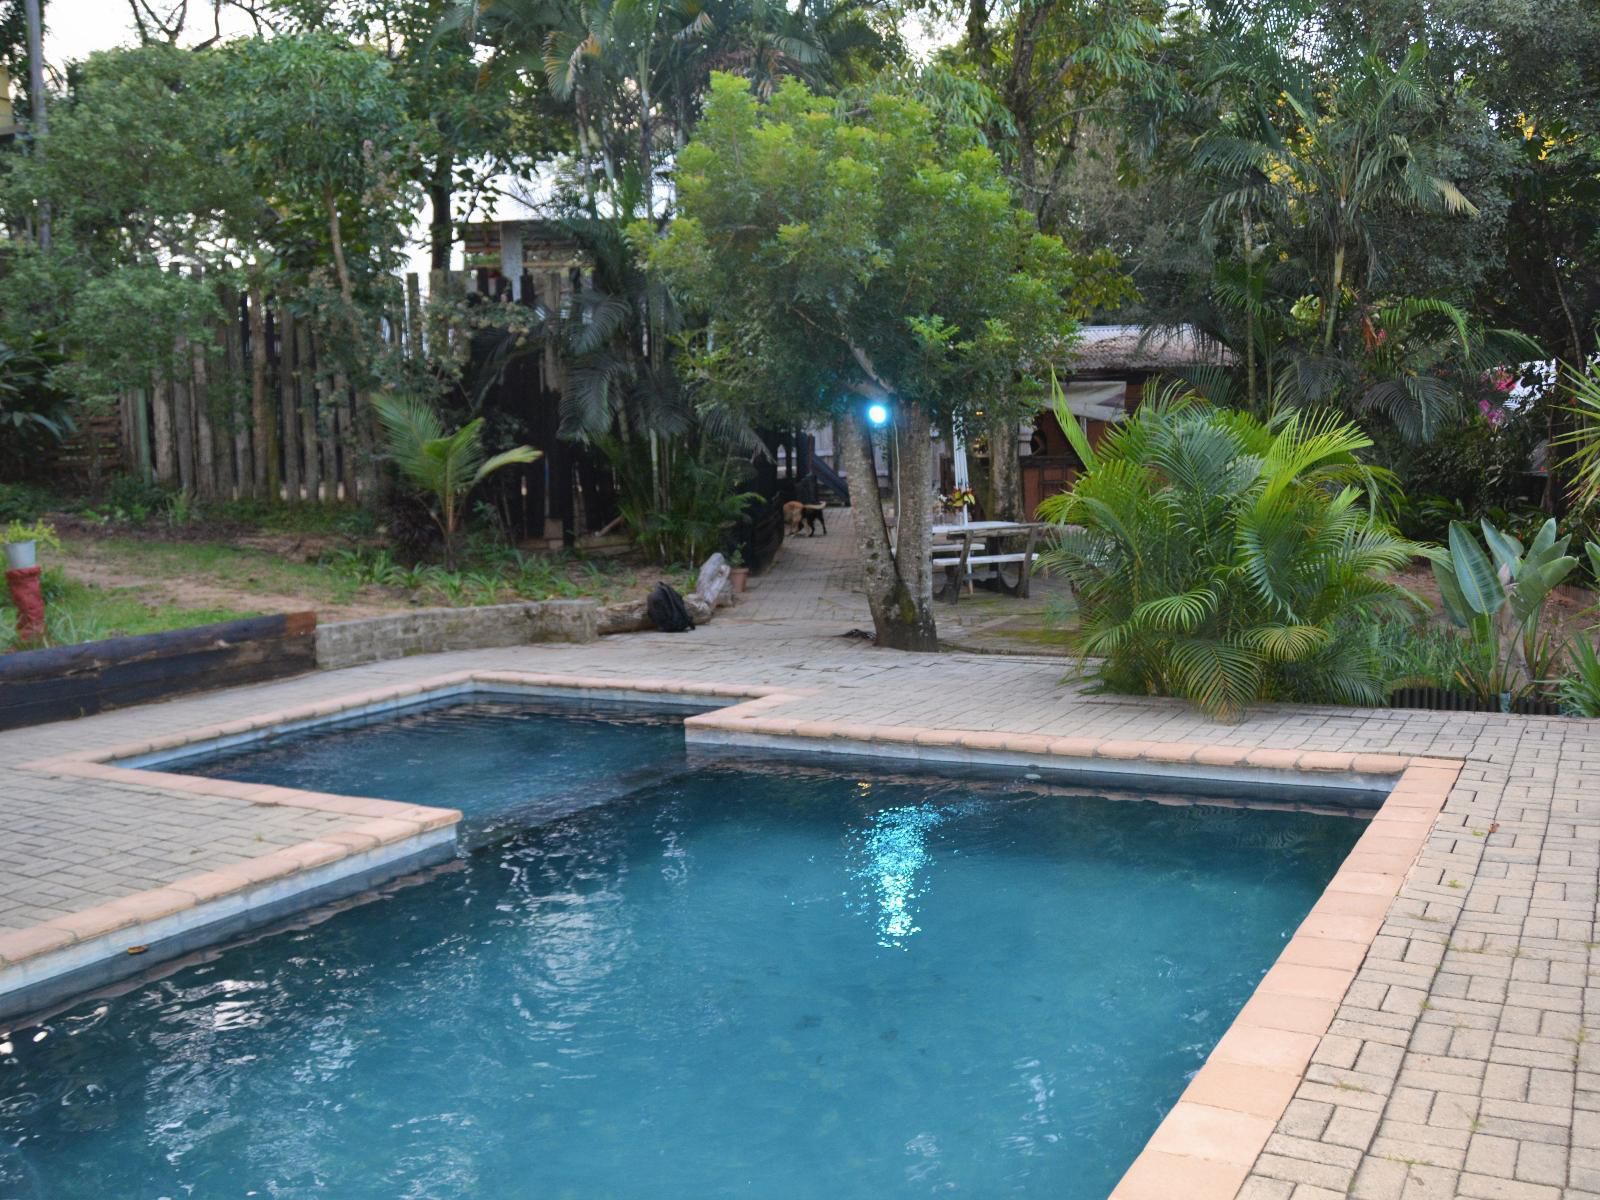 Hazyview Adventure Backpackers Numbi Park Hazyview Mpumalanga South Africa Palm Tree, Plant, Nature, Wood, Garden, Swimming Pool